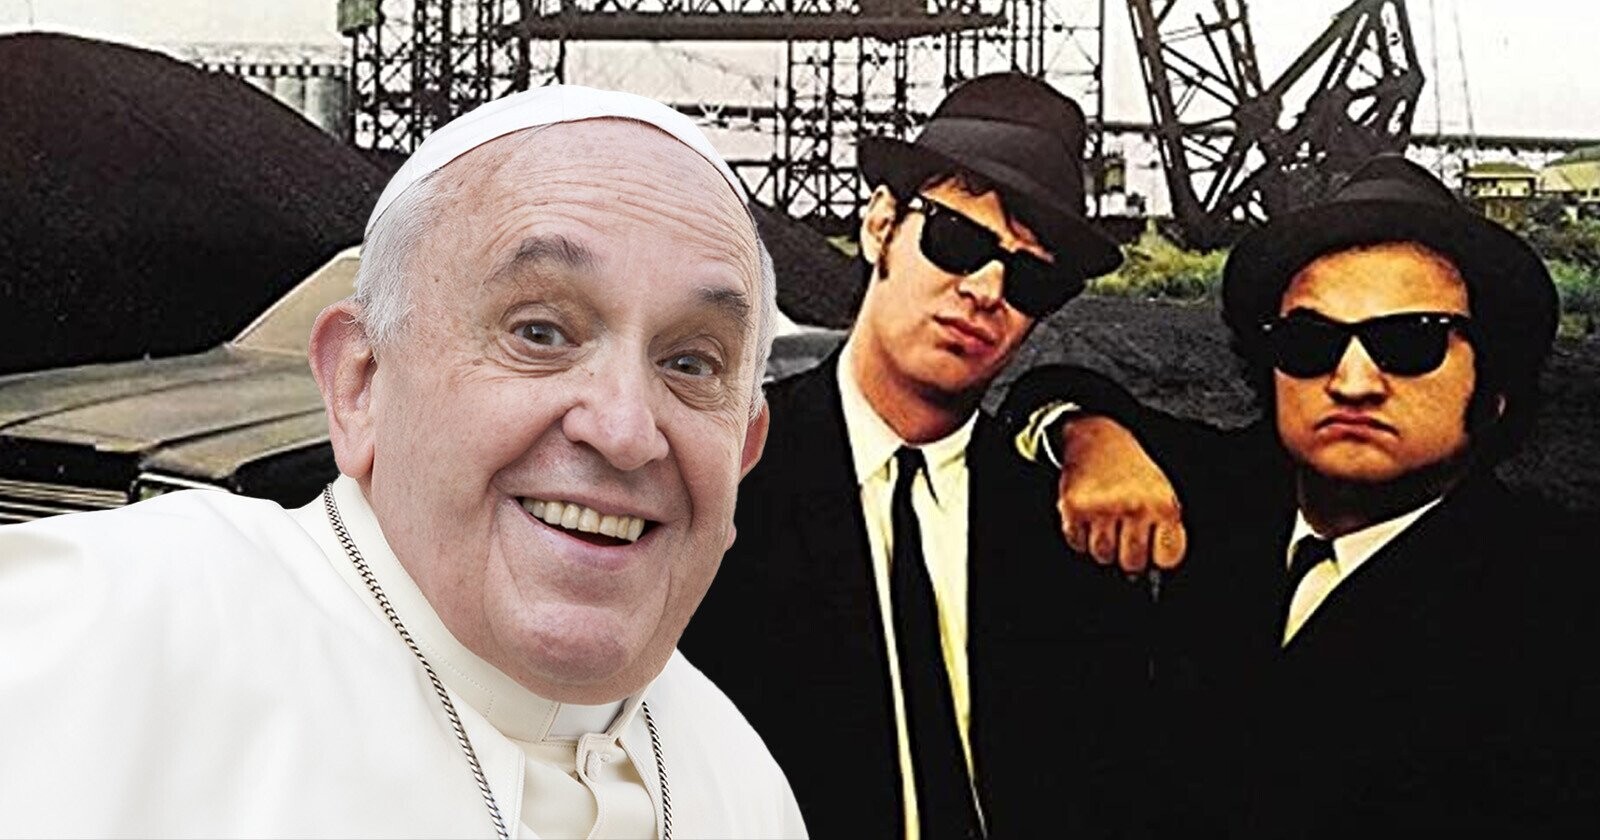 The Blues Brothers' Is An Official 'Catholic Classic' According to the  Vatican